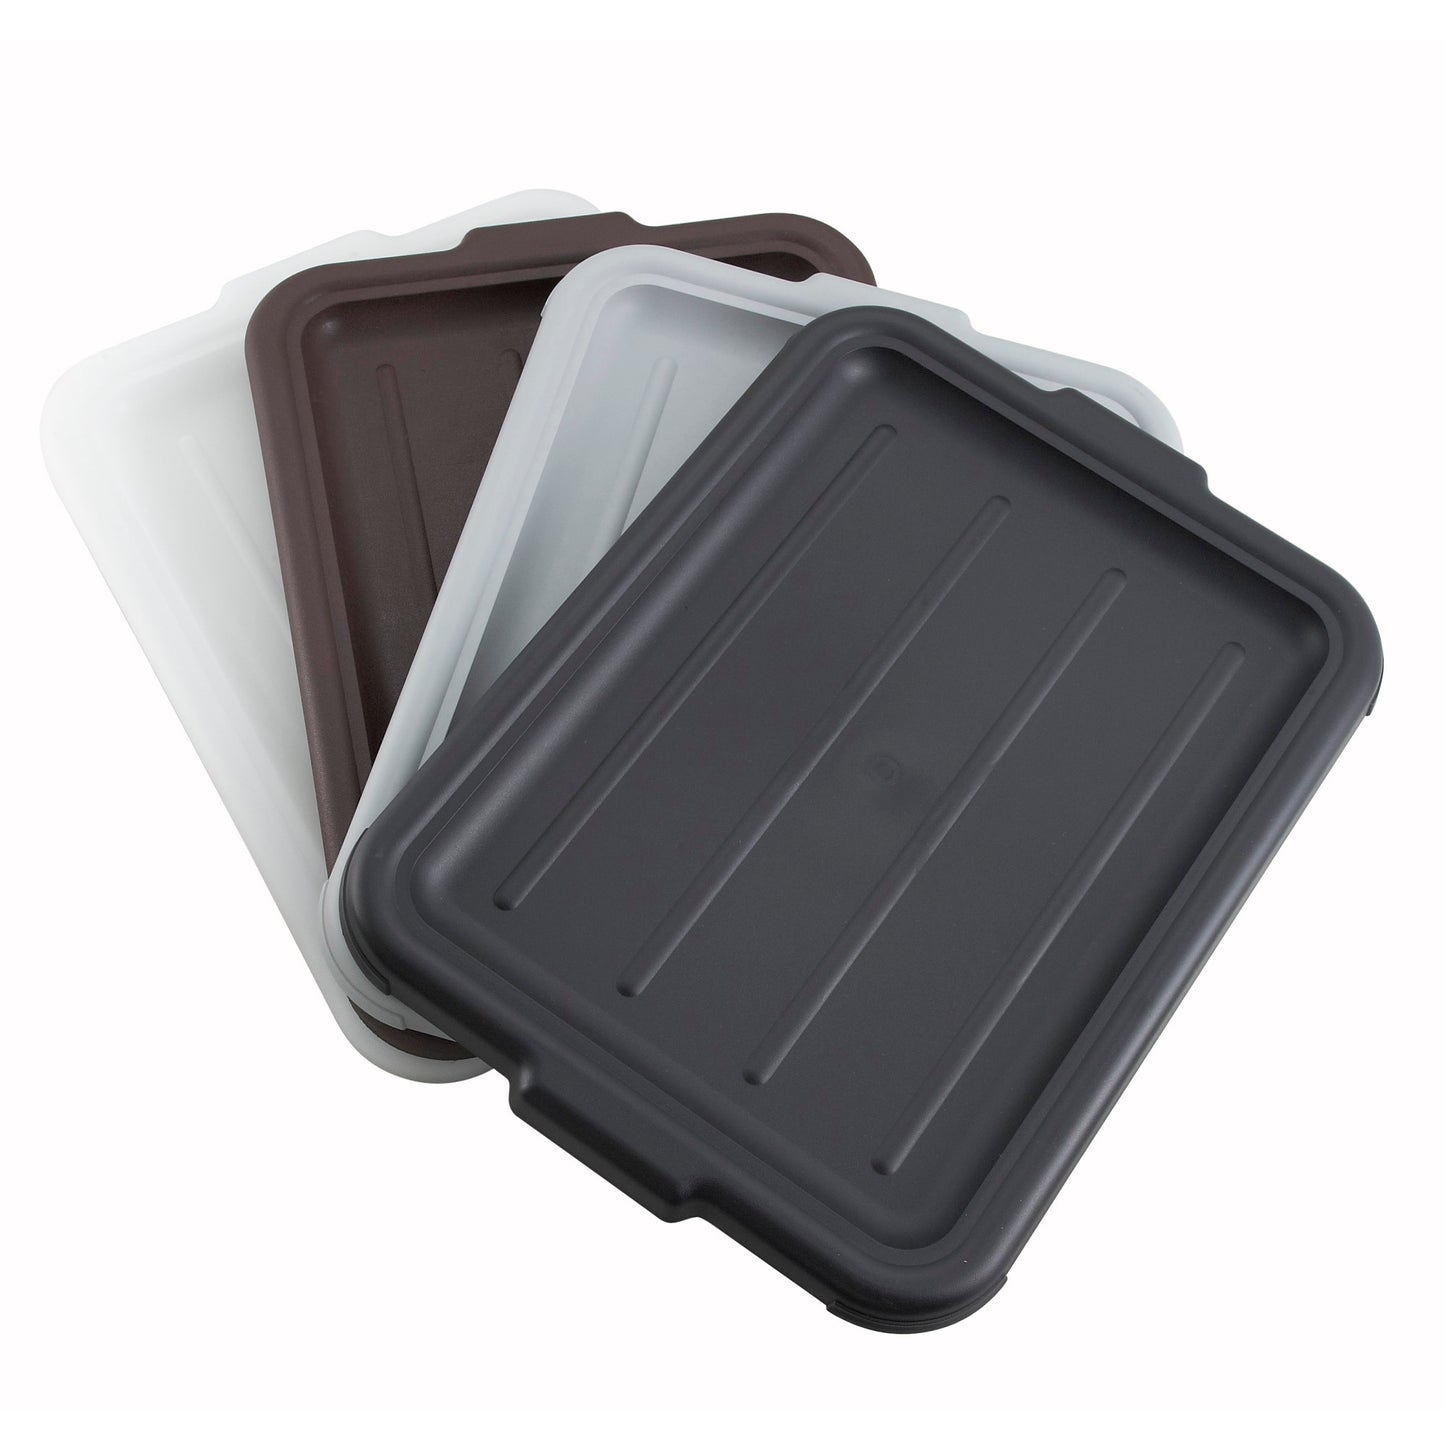 Cover for Standard Dish Boxes - White